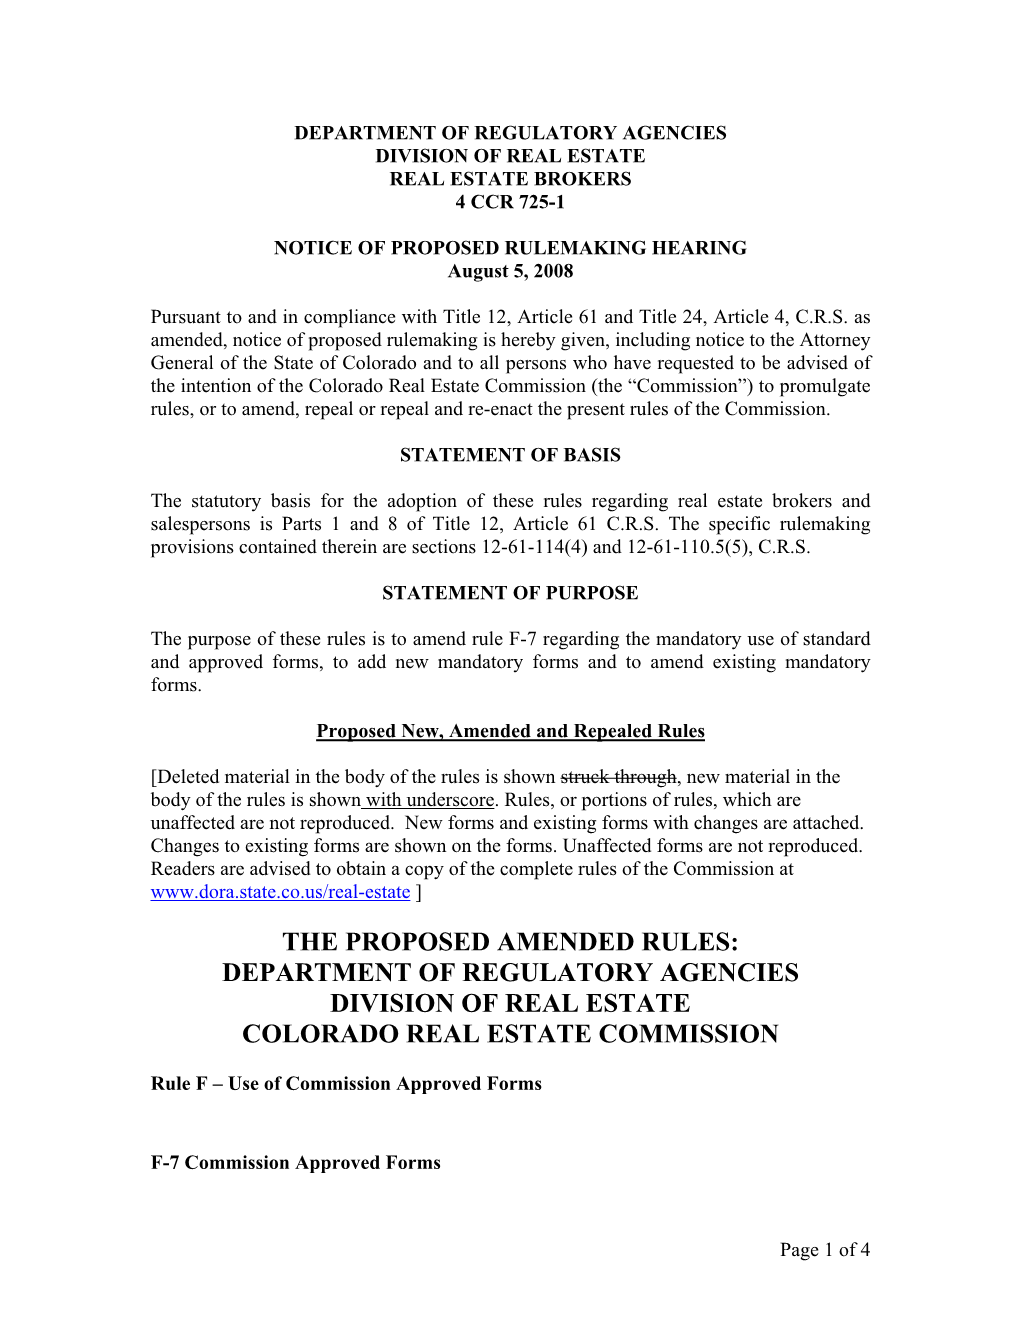 Colorado Real Estate Comm Notice of Rule Making